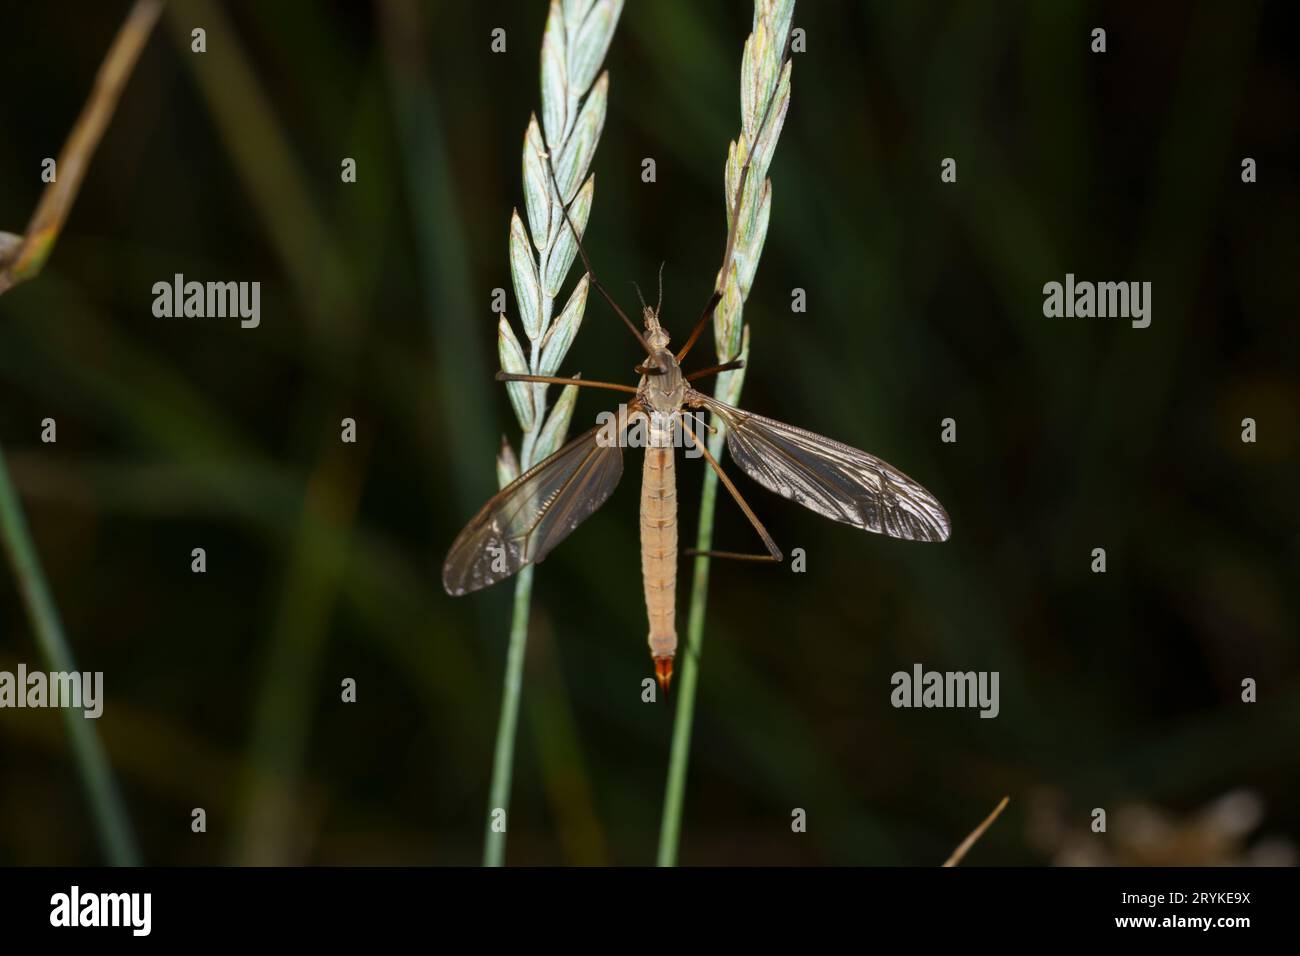 Tipula maxima Family Tipulidae Genus Tipula Large crane Mosquito wild nature insect wallpaper, picture, photography Stock Photo